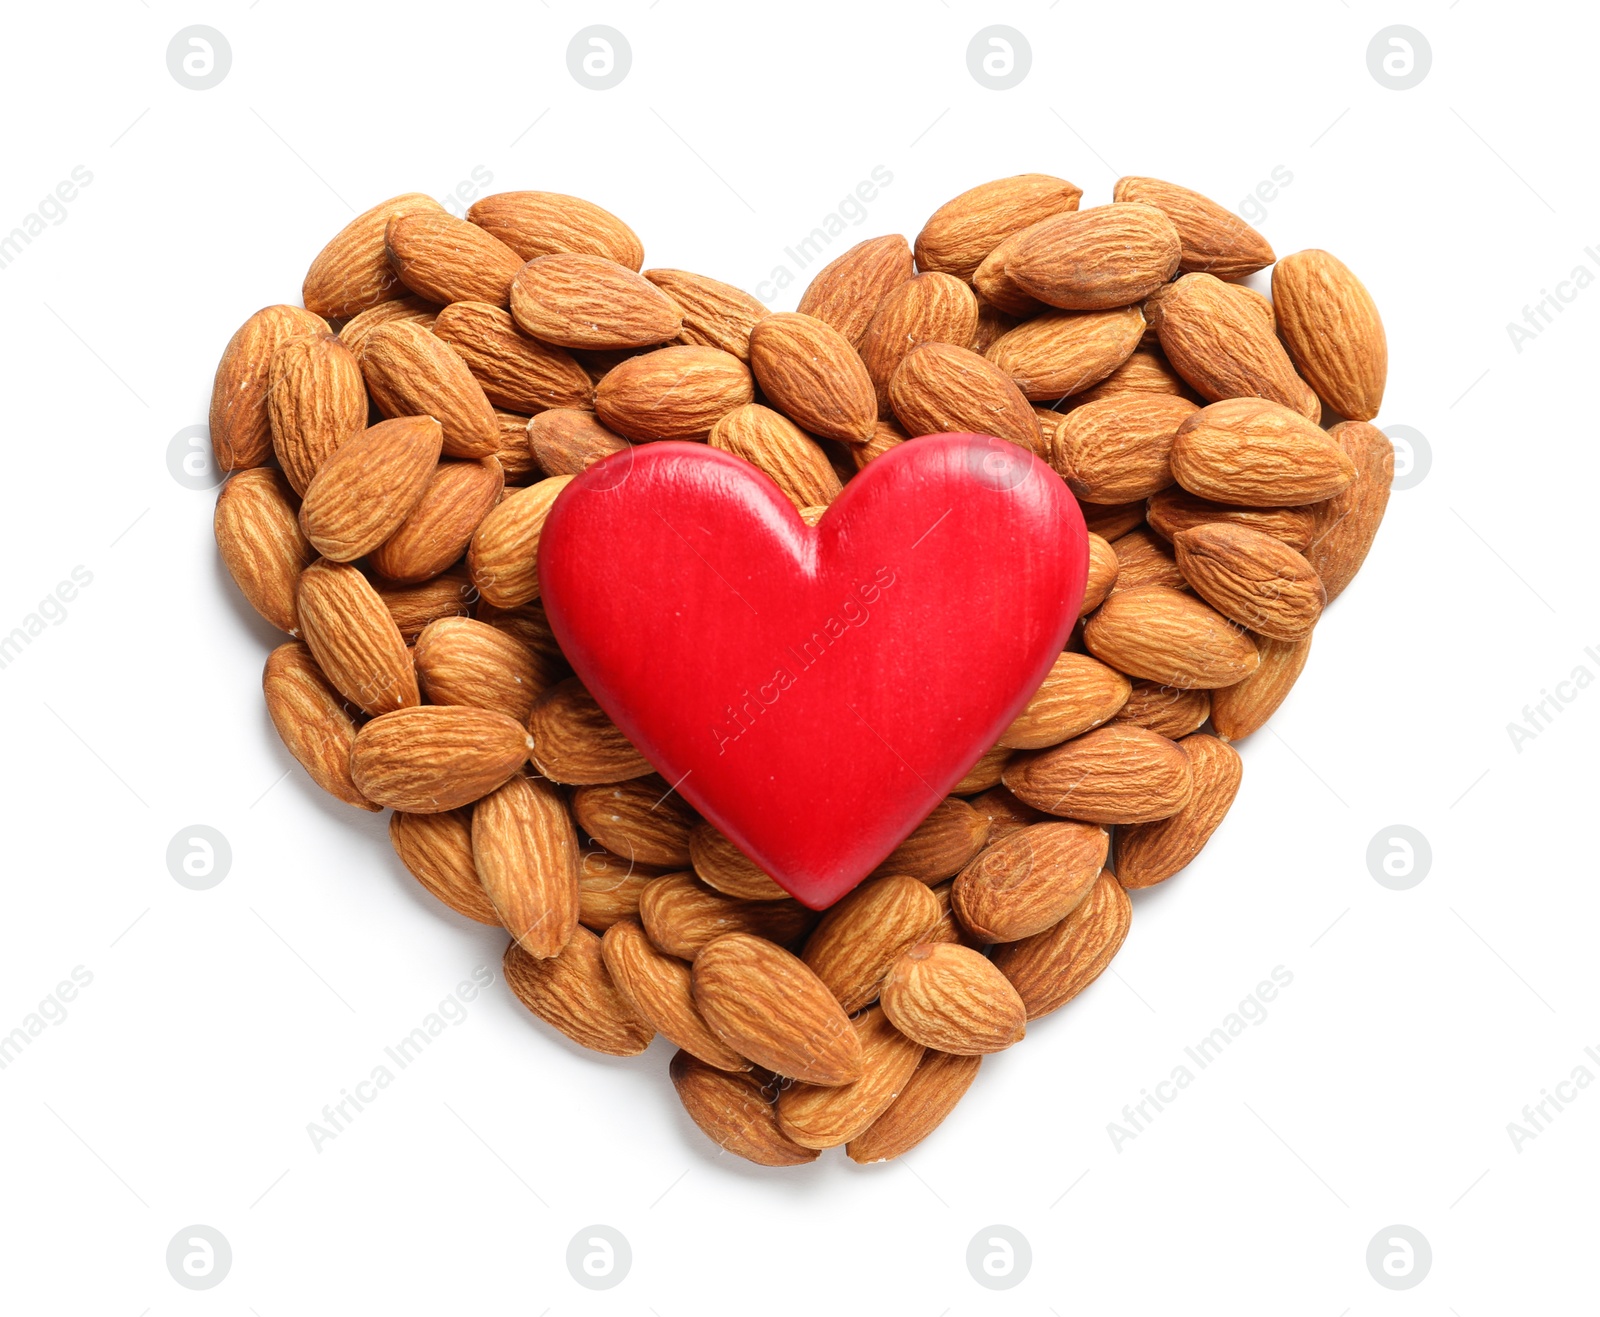 Photo of Heart made of almonds and decor on white background, top view. Healthy diet